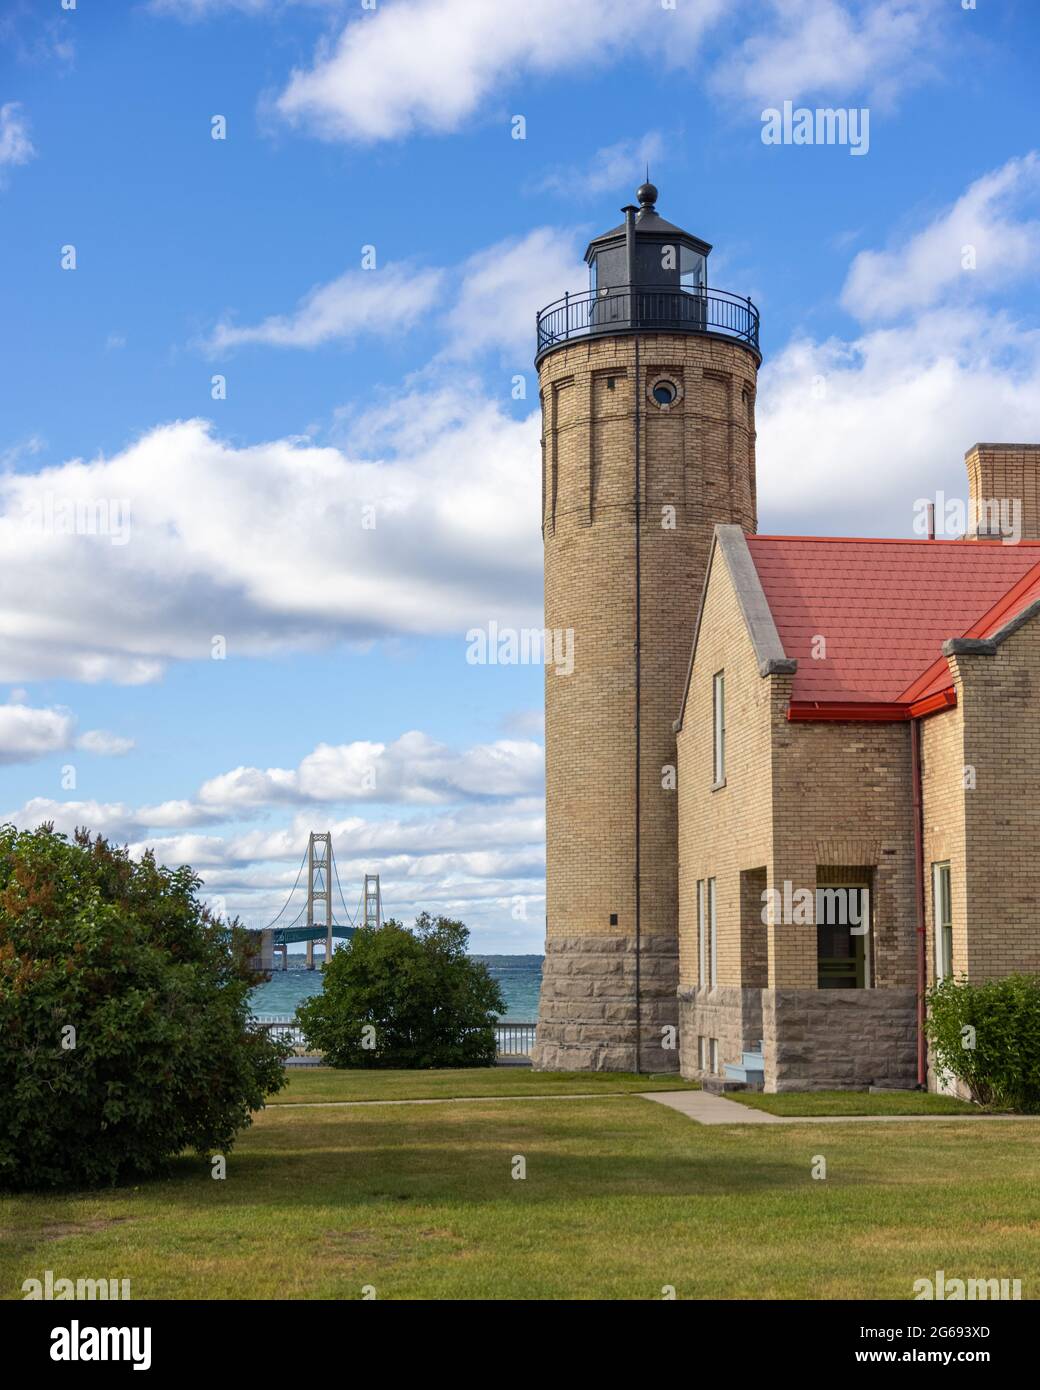 Historic Old Mackinac Point Lighthouse still stands watch over the treacherous Straits of Mackinac, though only as a Michigan State Park. The Mackinac Stock Photo